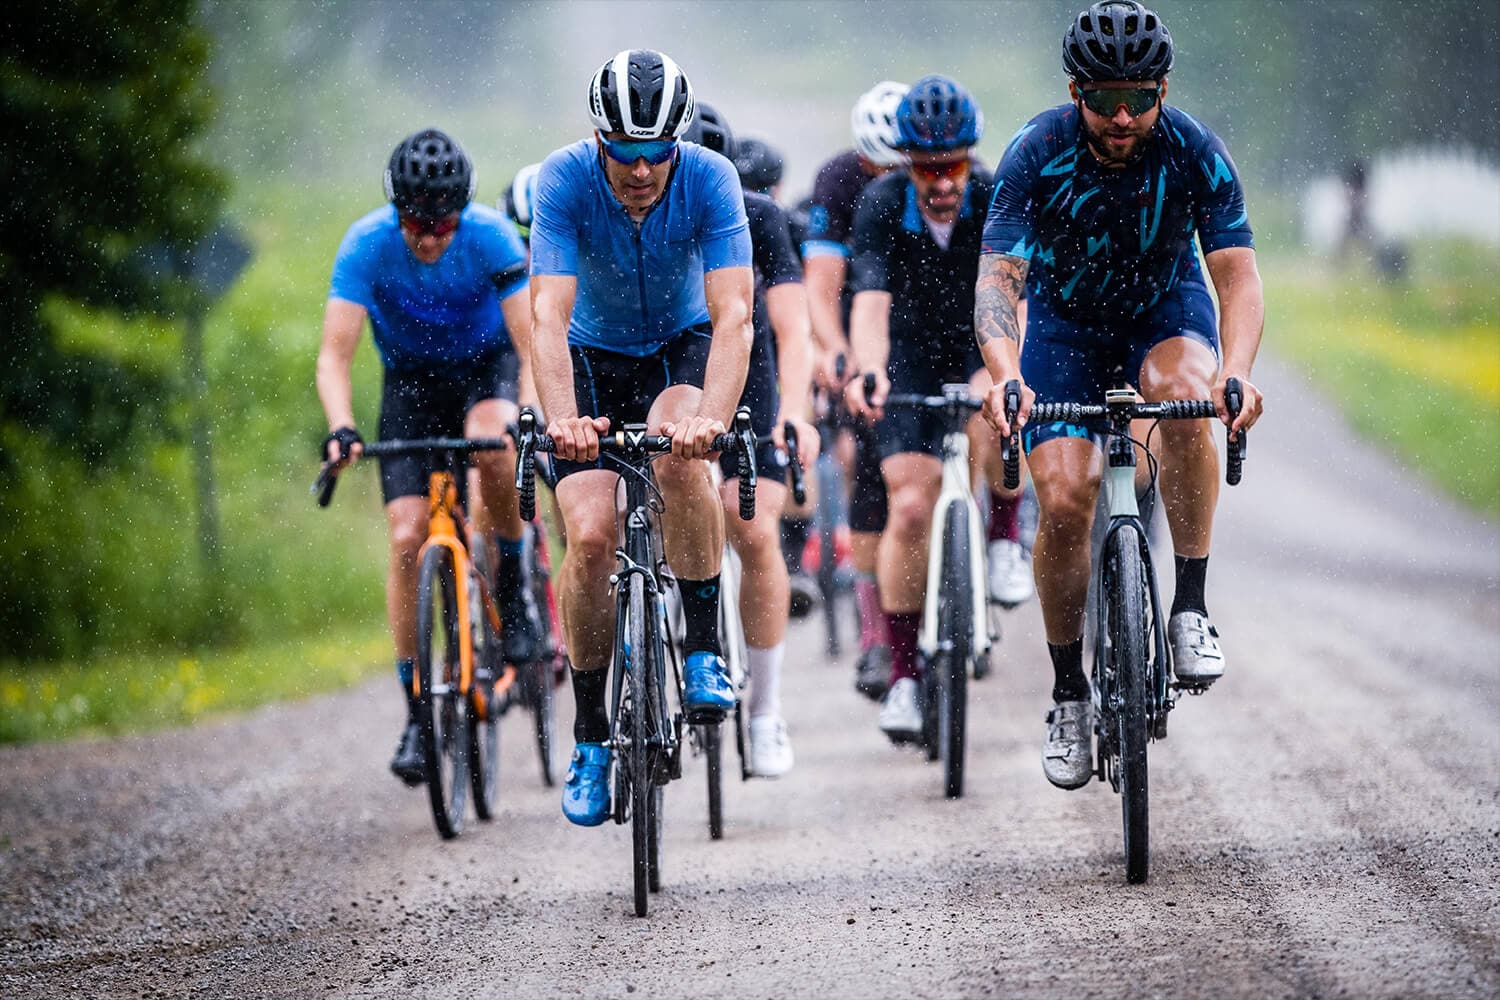 Group gravel bike ride on a rainy day with Shimano GRX gears